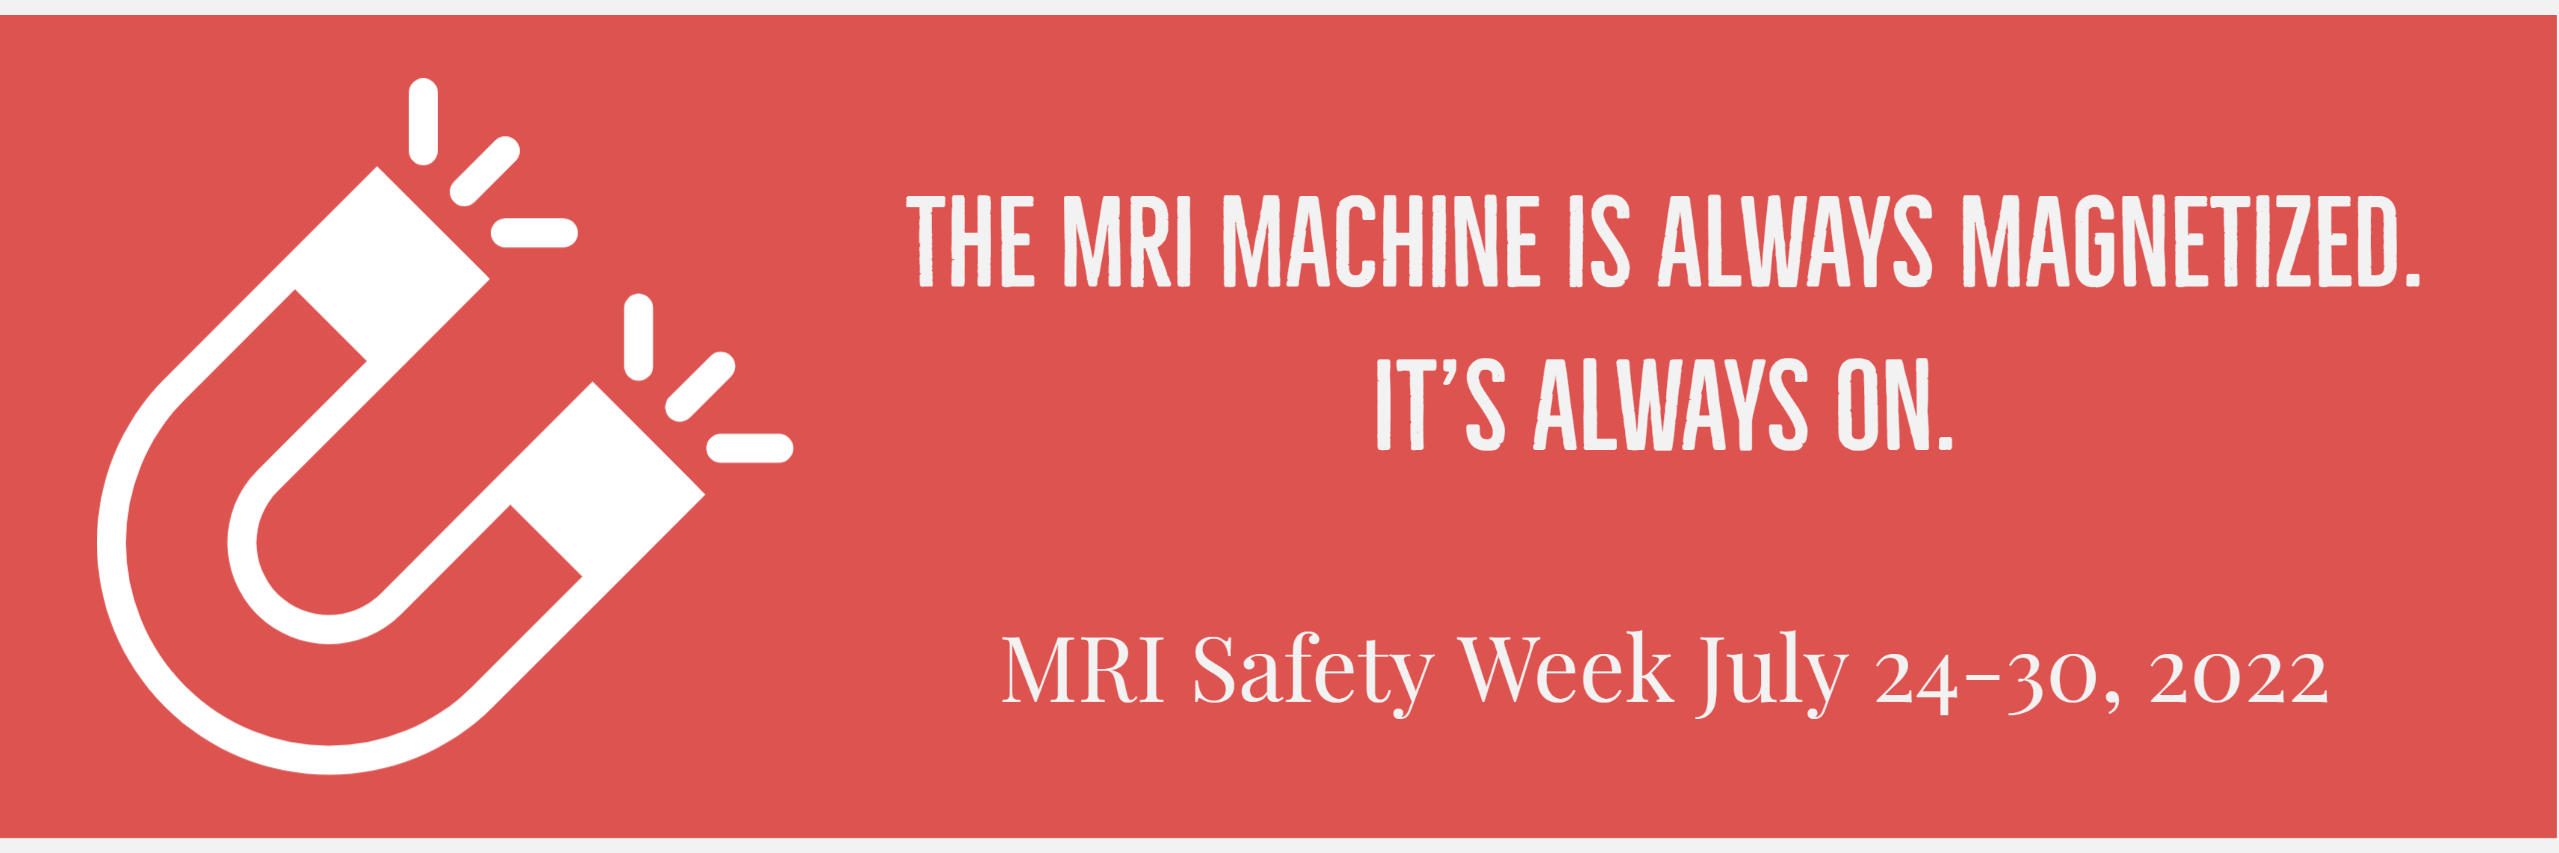 U shaped magnet icon with text that says MRI Safety Week July 20-30, 2022